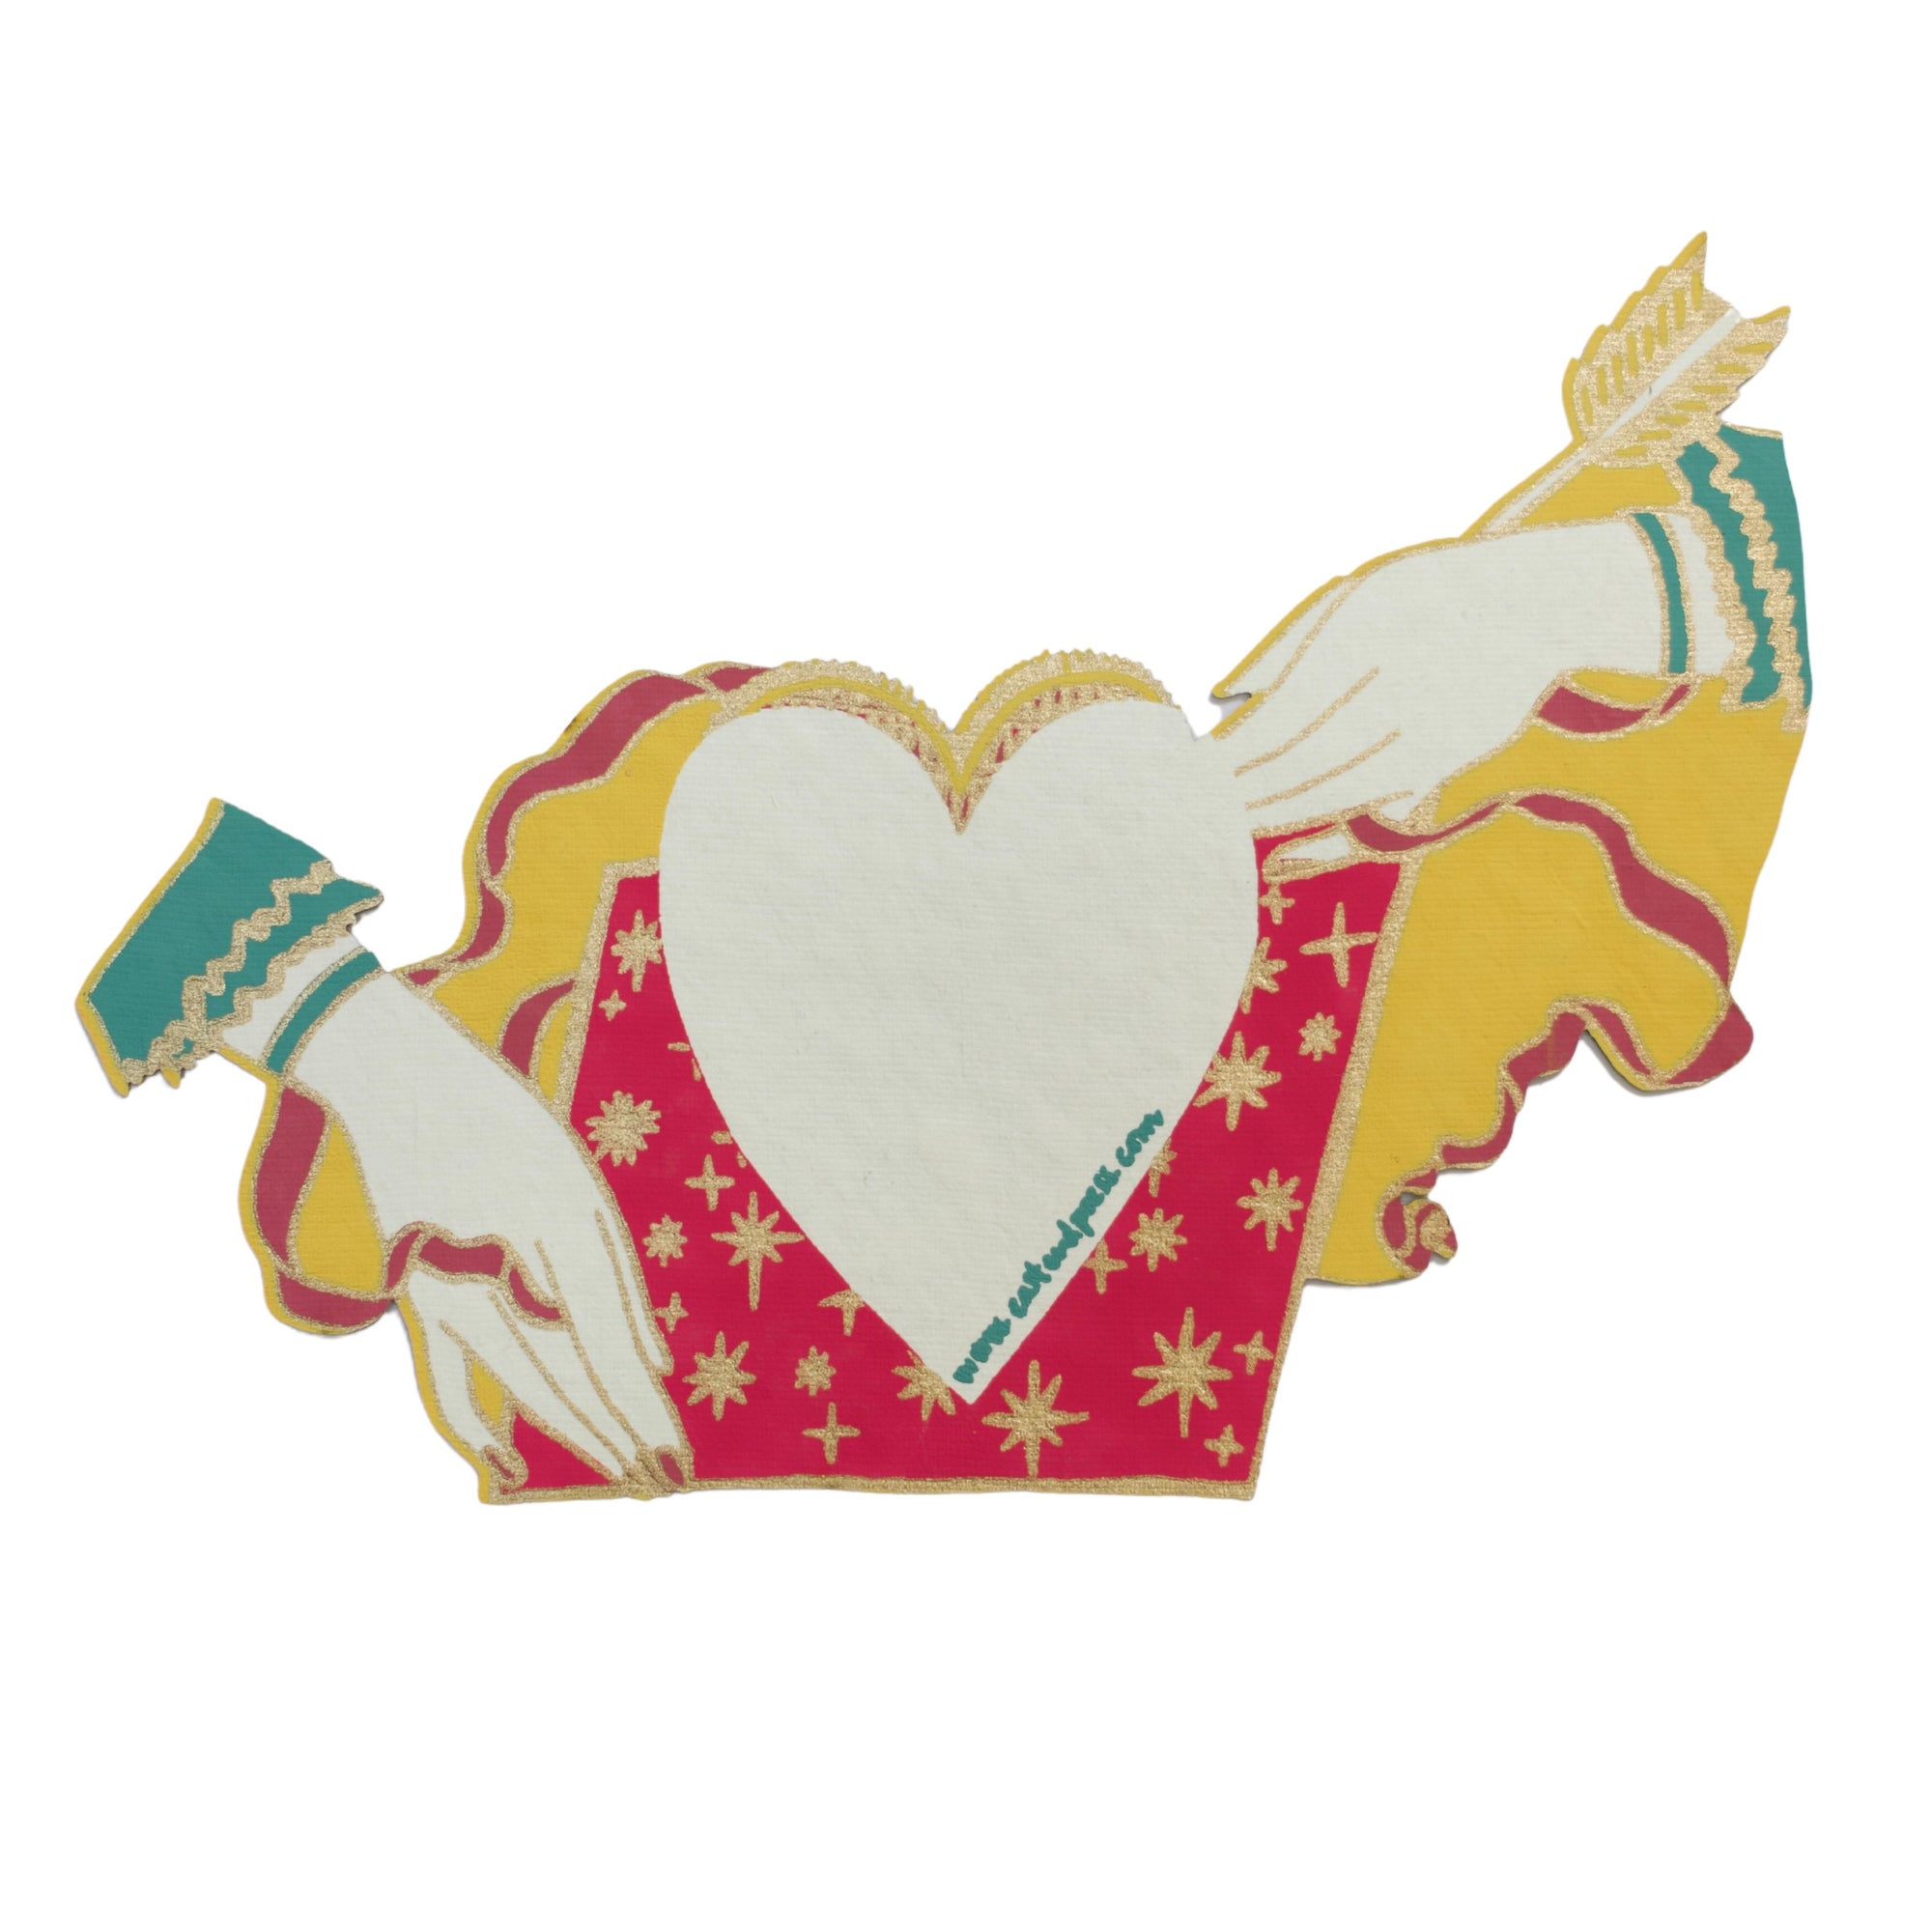 East End Press Heart and Hands Greeting Card